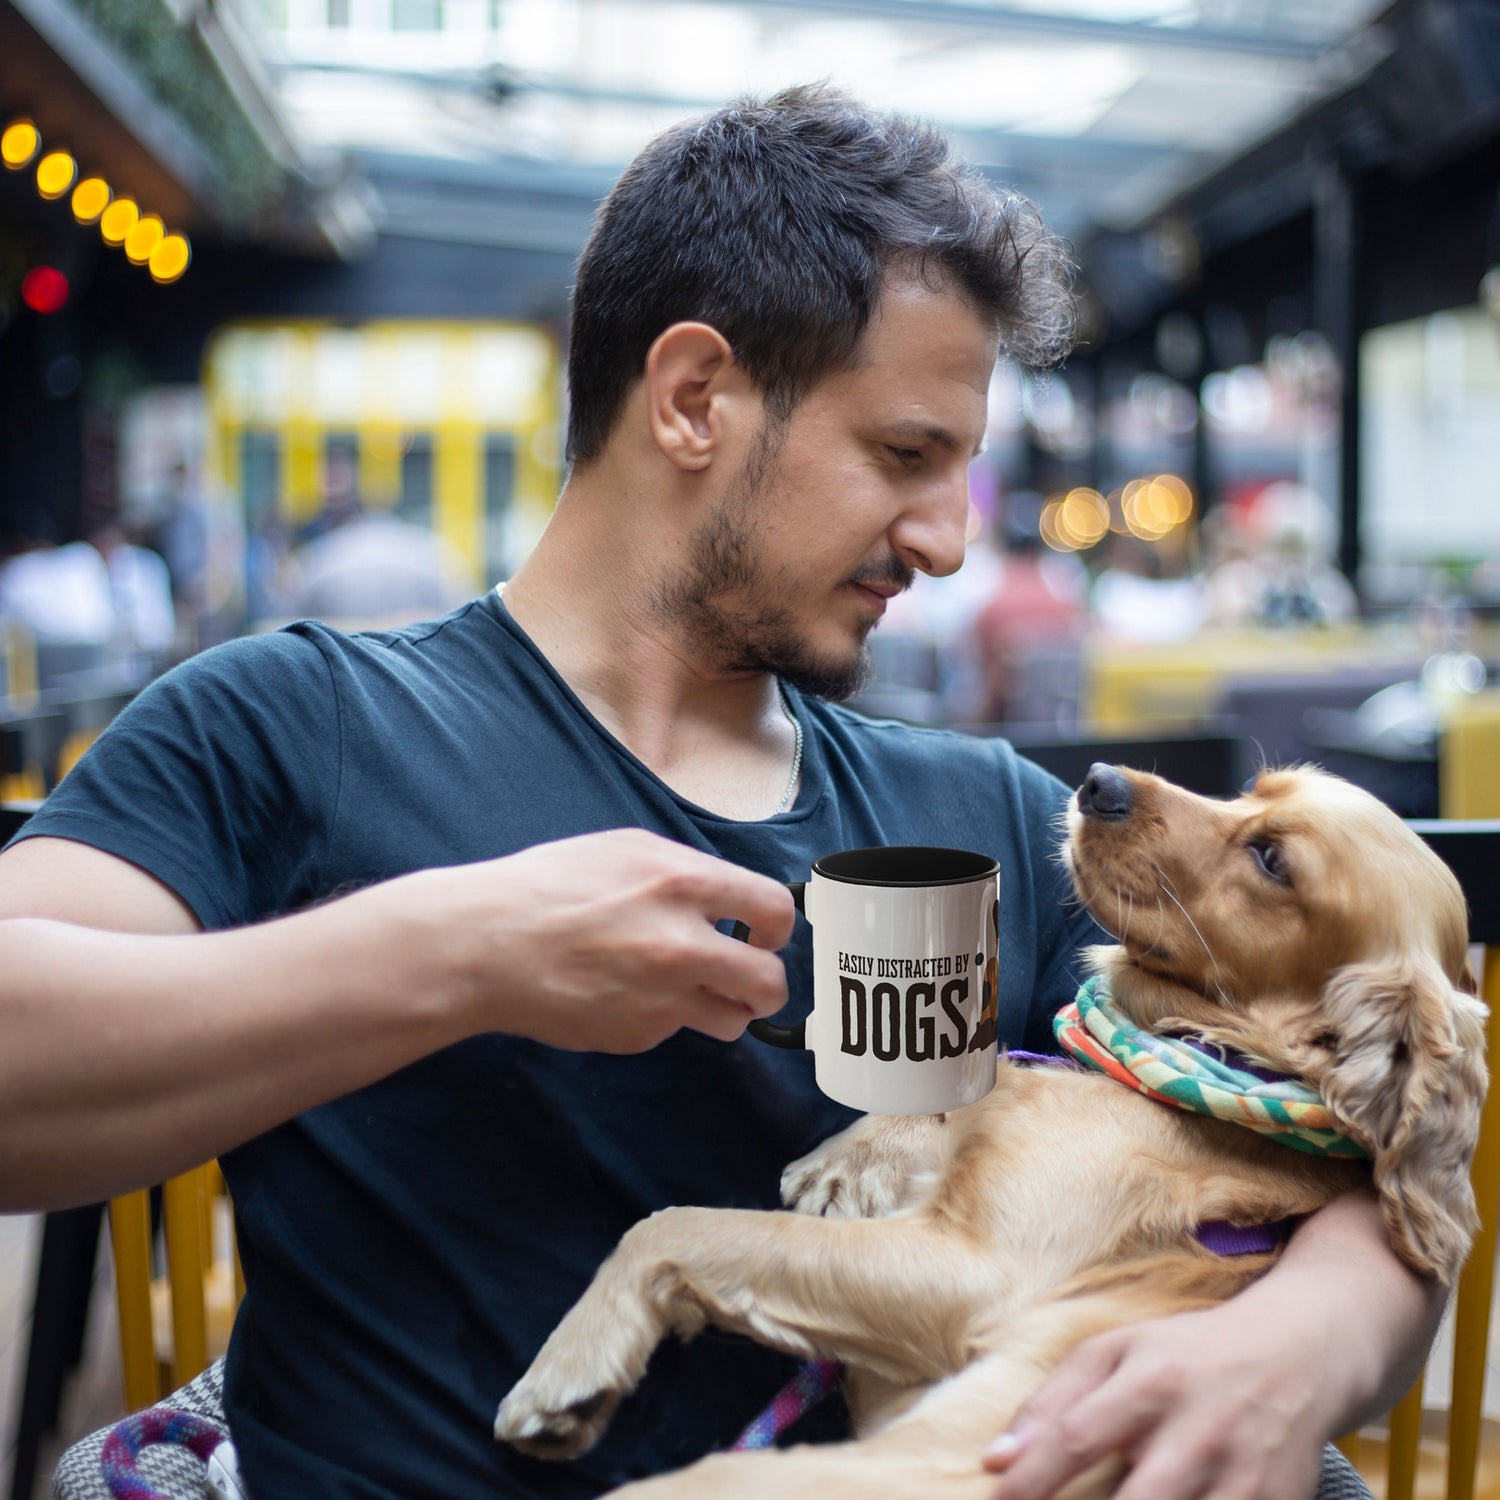  A man sits with a warm smile, cradling his Golden Retriever in one arm, while the other hand grips a Dogs Pure Love mug, displaying the text 'Easily distracted by dogs.'